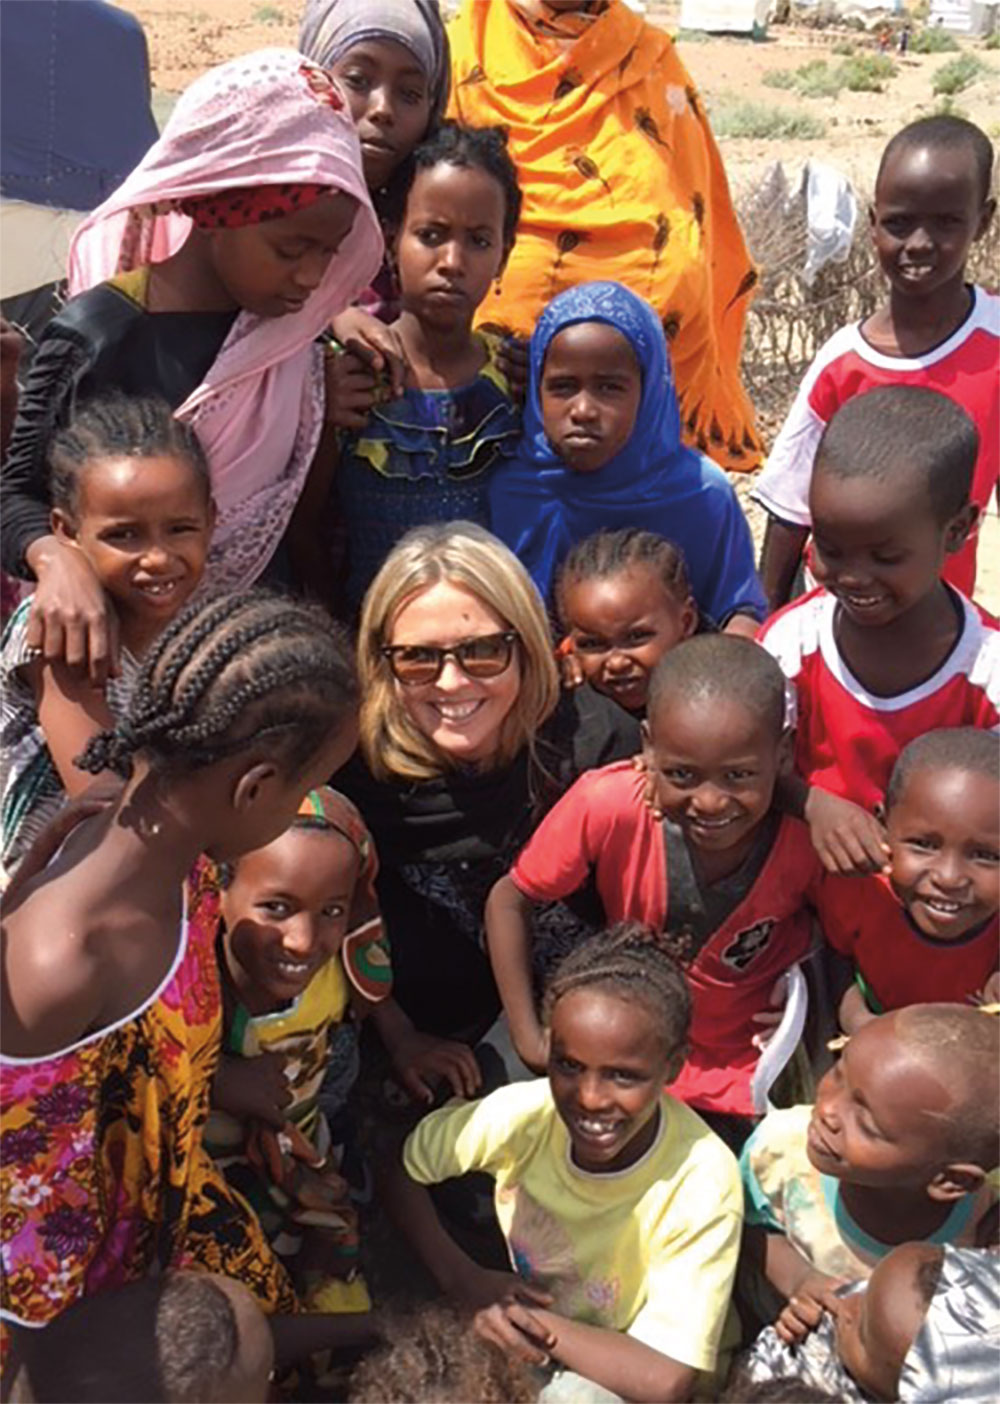 Allison Oman Lawi smiling in sunglasses surrounded by smiling children